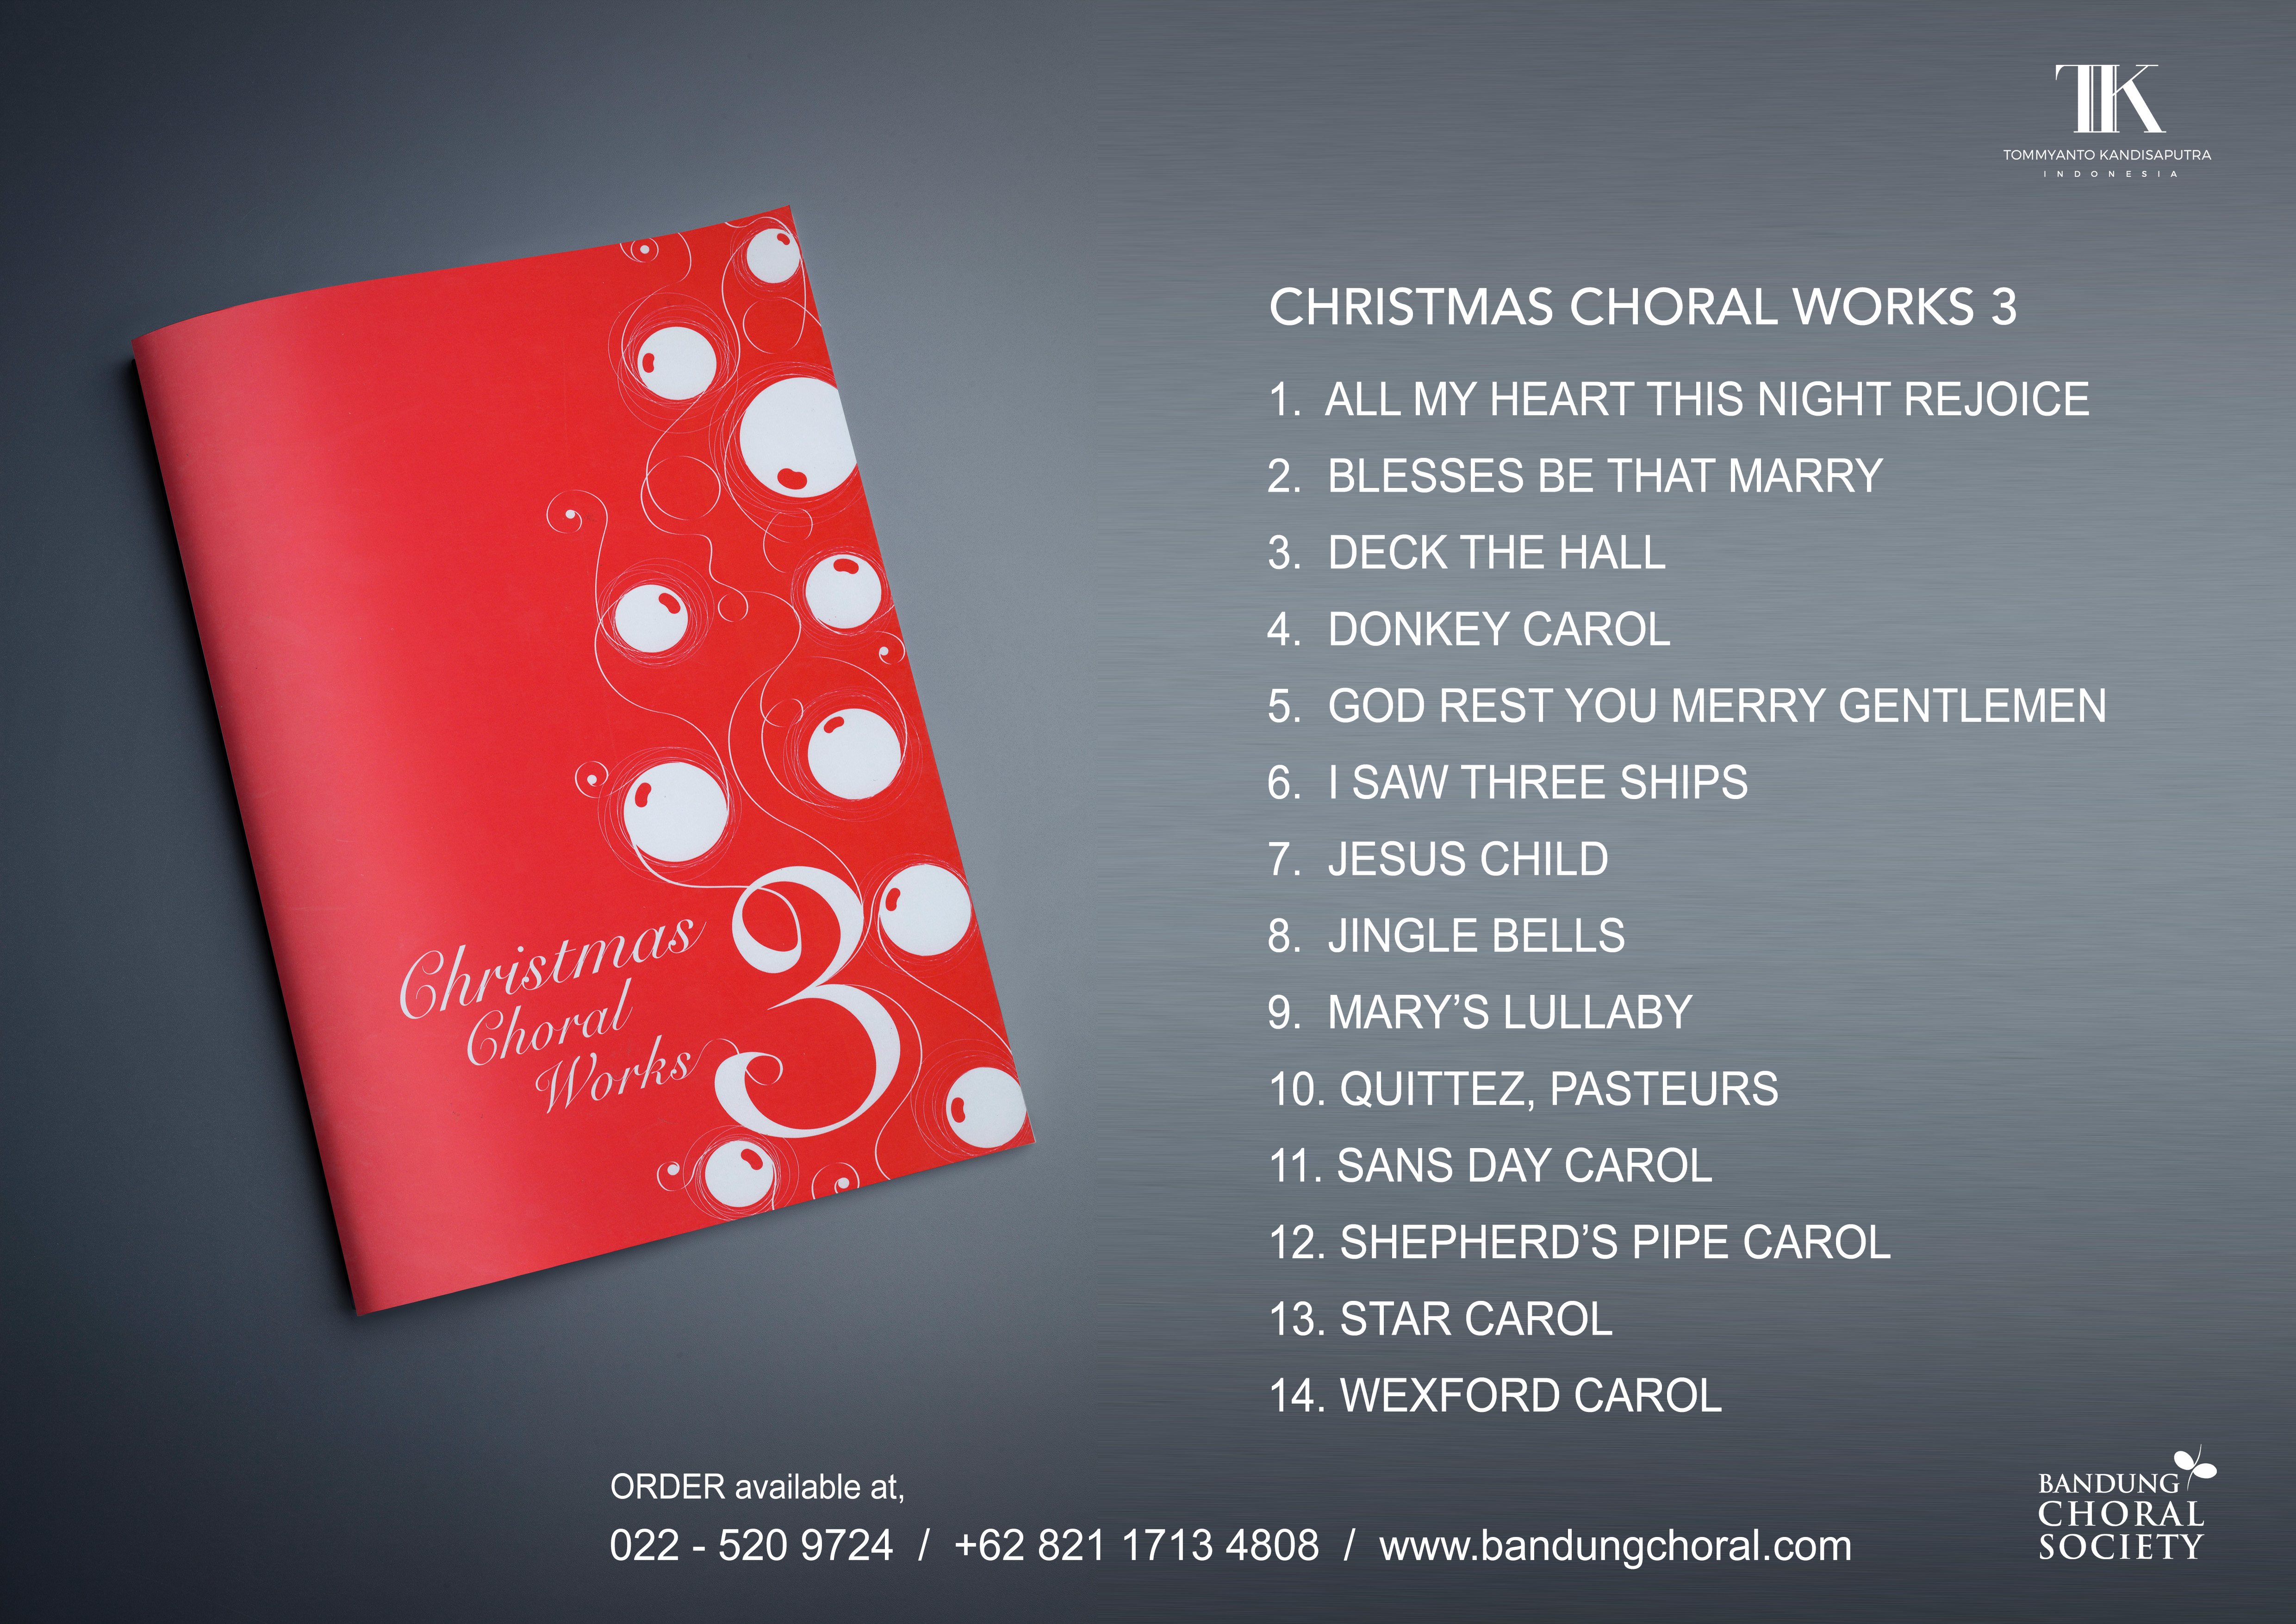 CHRISTMAS CHORAL WORKS 3